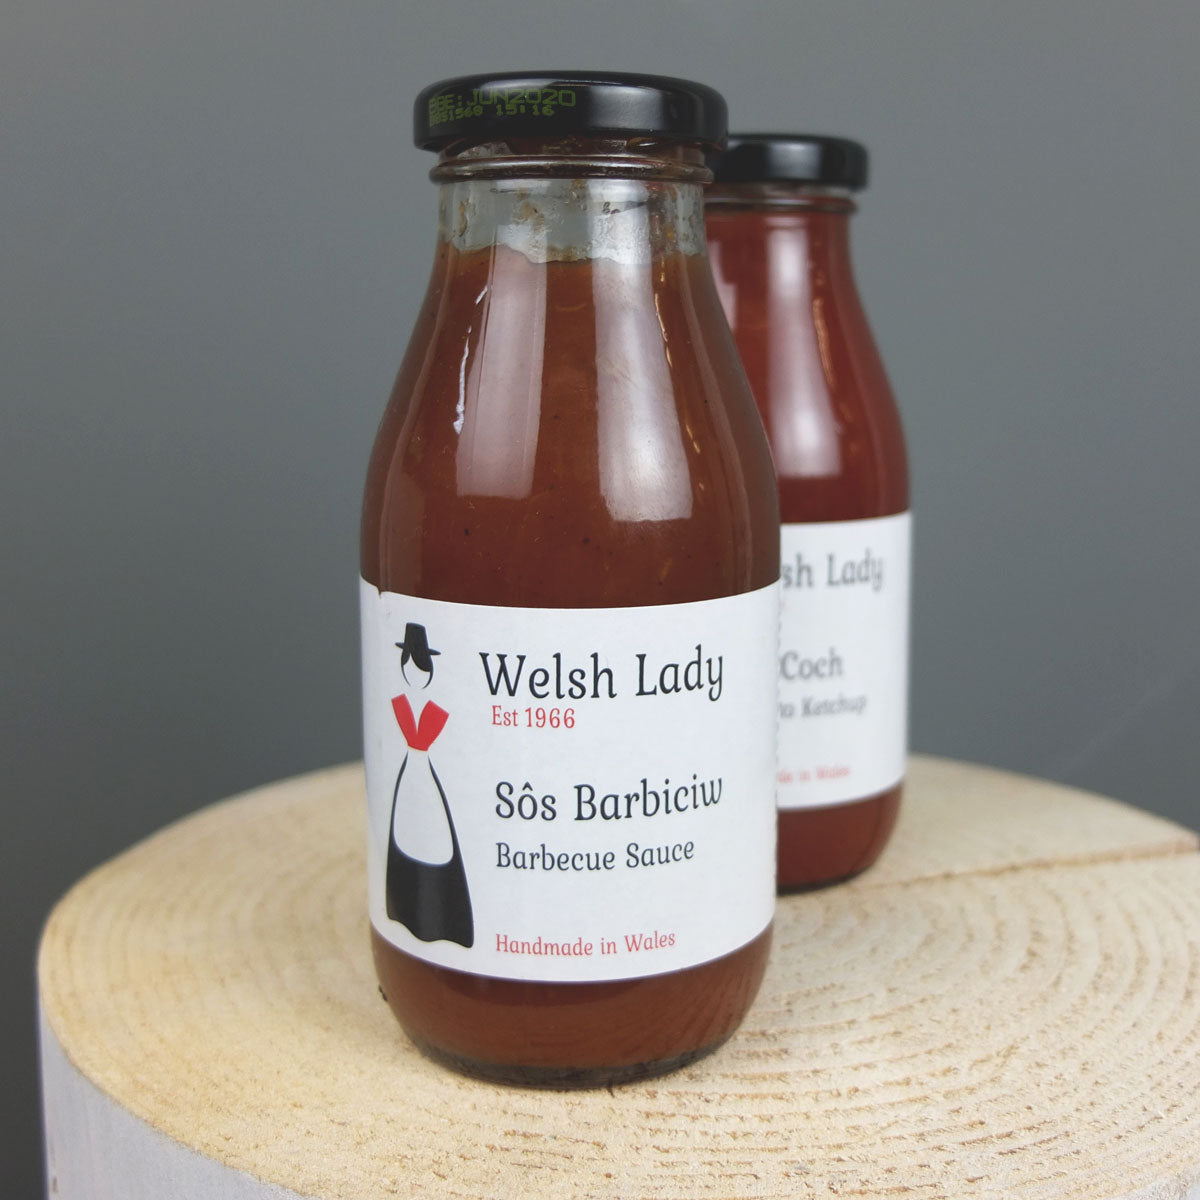 Sos Barbiciw - Barbebcue Sauce by Welsh Lady Preserves